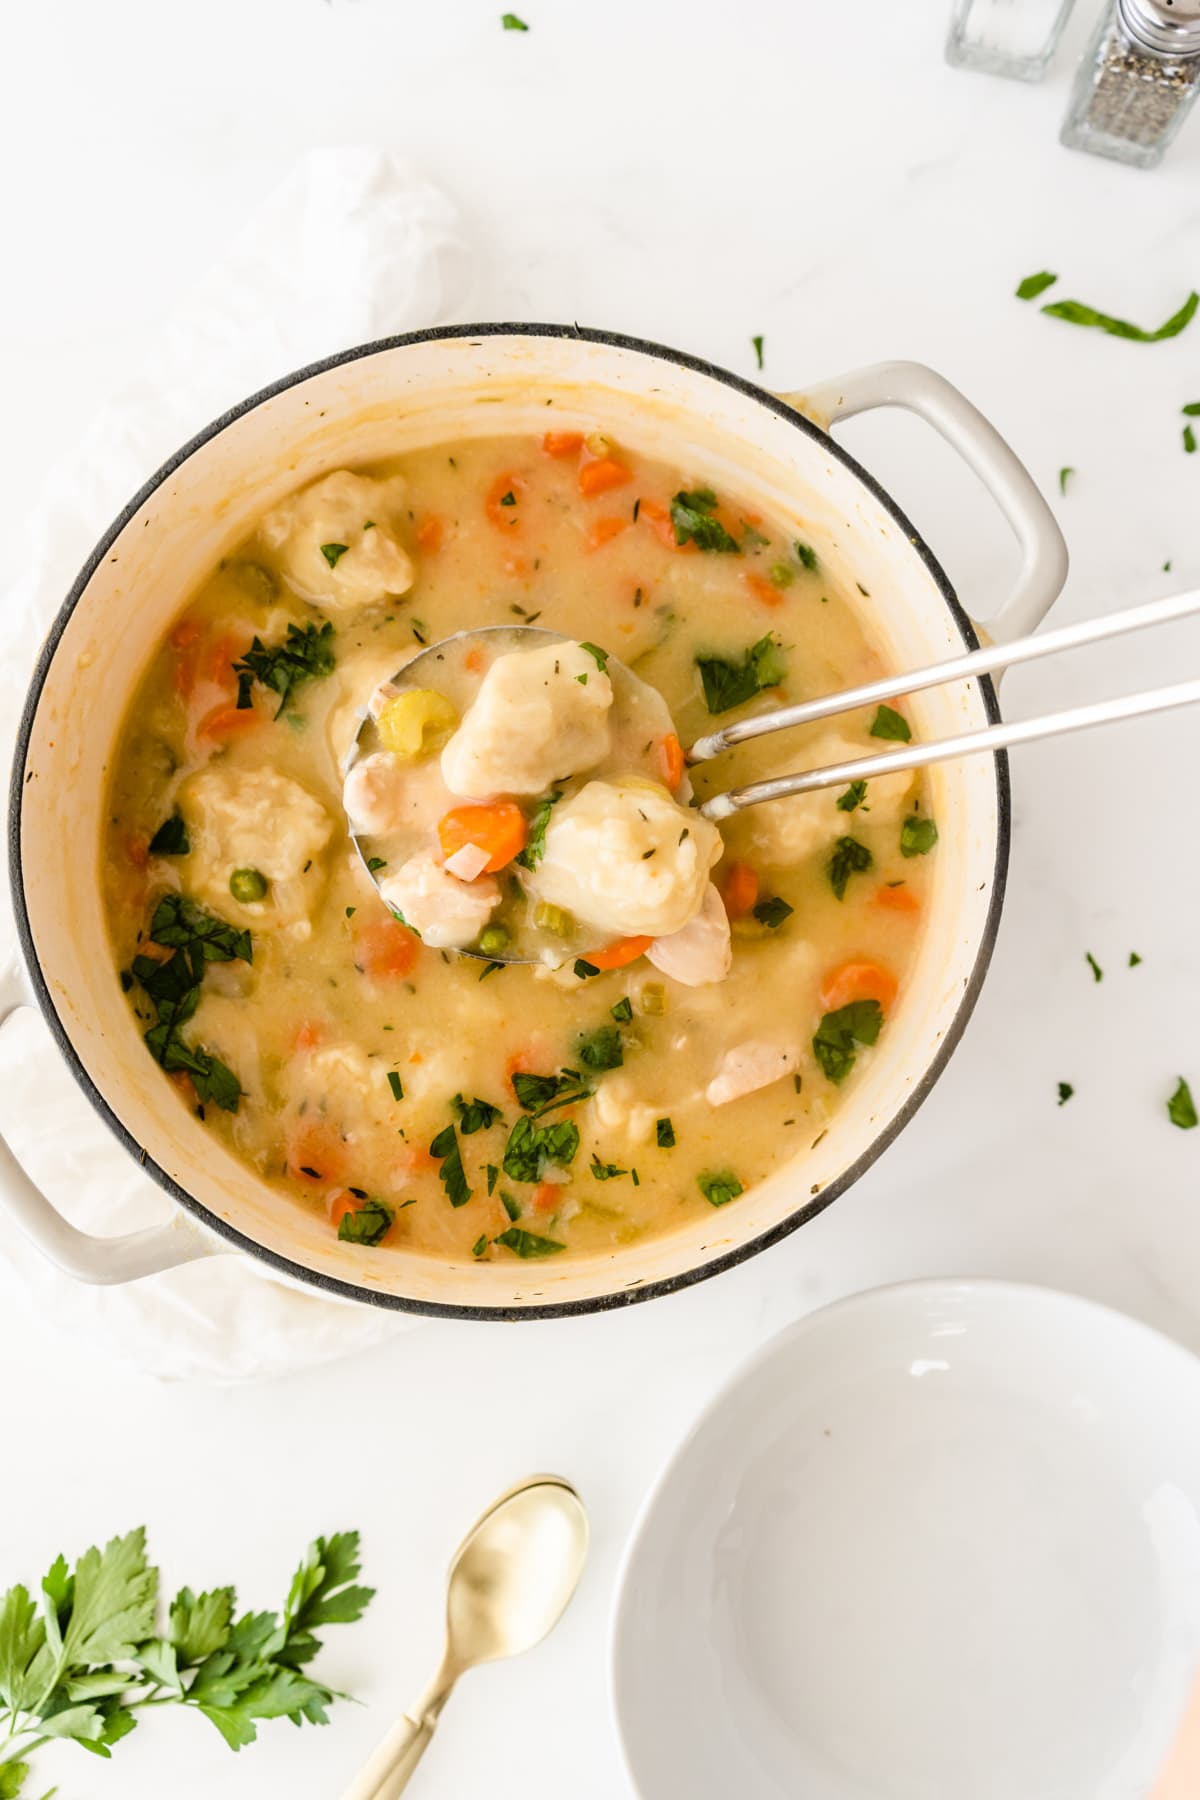 Ladle with chicken and dumpling soup